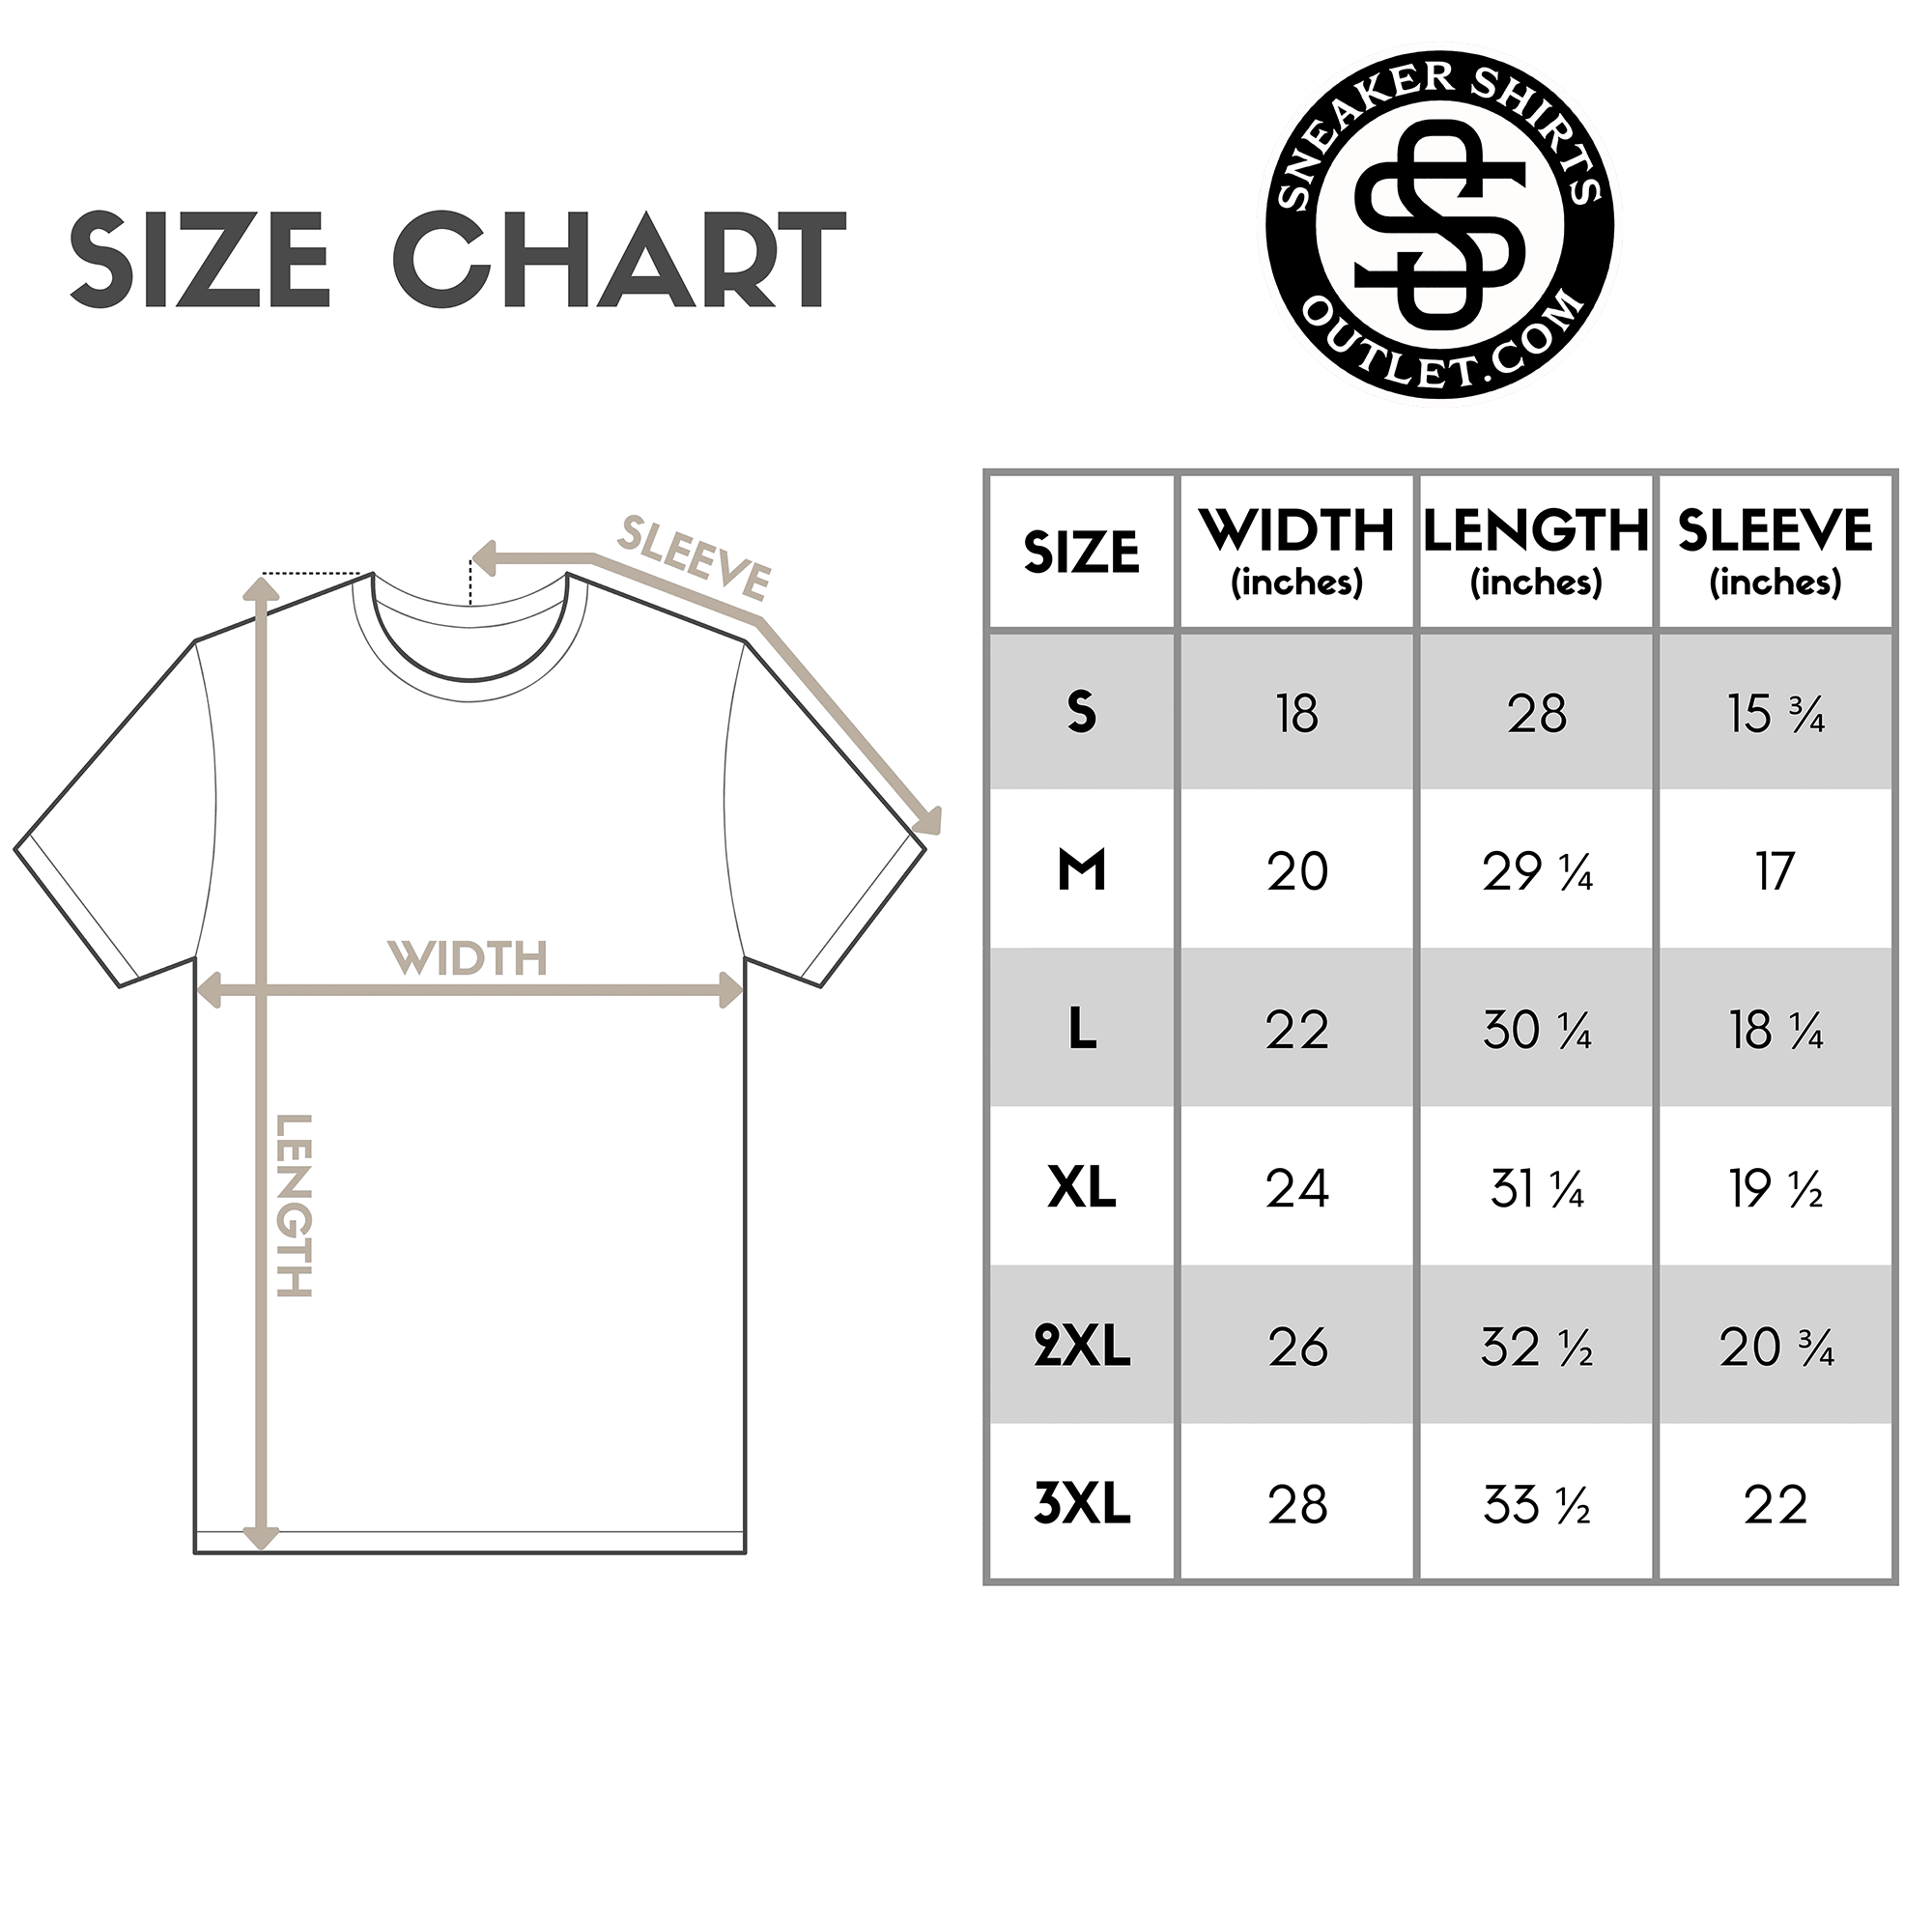 No Fake Friends Shirt by Dope Star Clothing® size chart photo